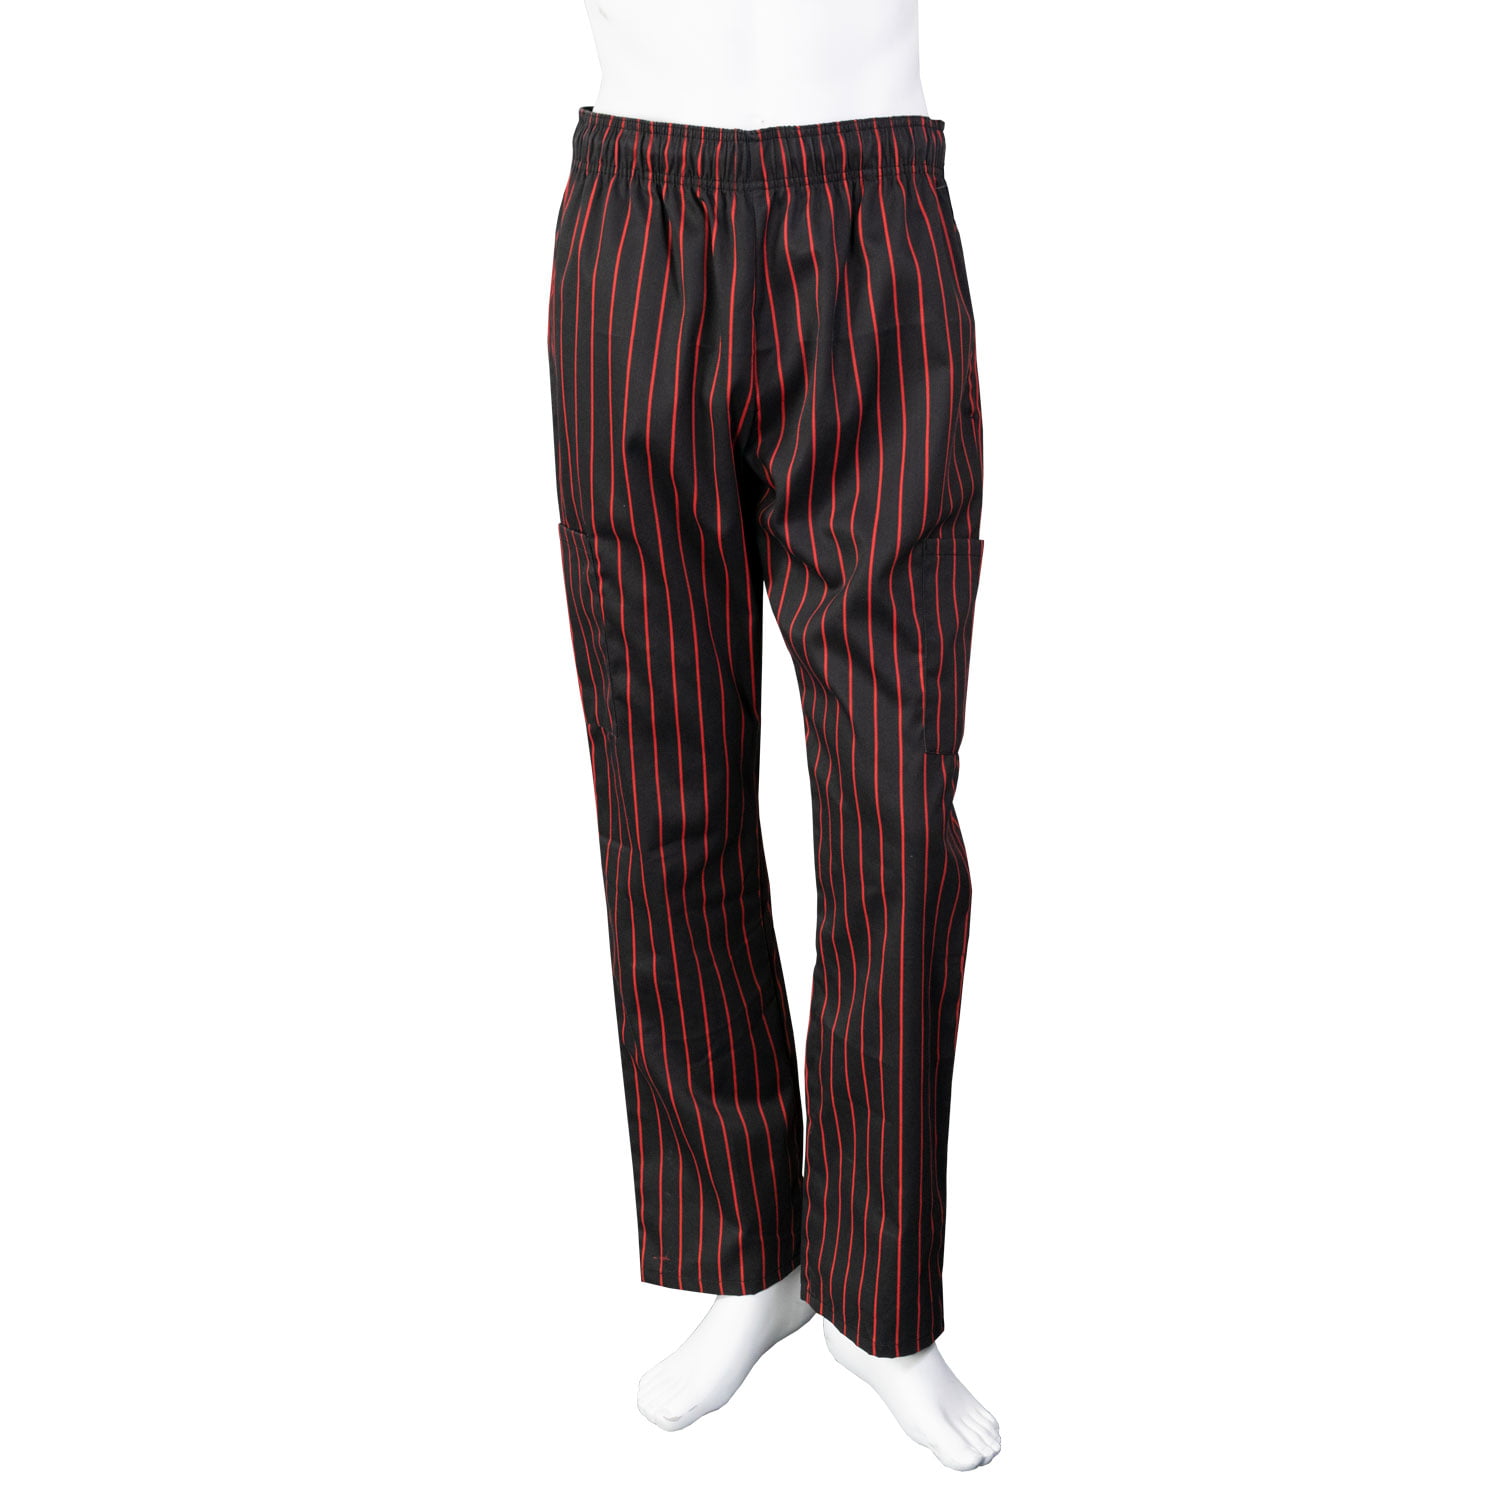 Chef Code Baggy Chef Pants with Cargo Pockets Elastic Waist CC220 